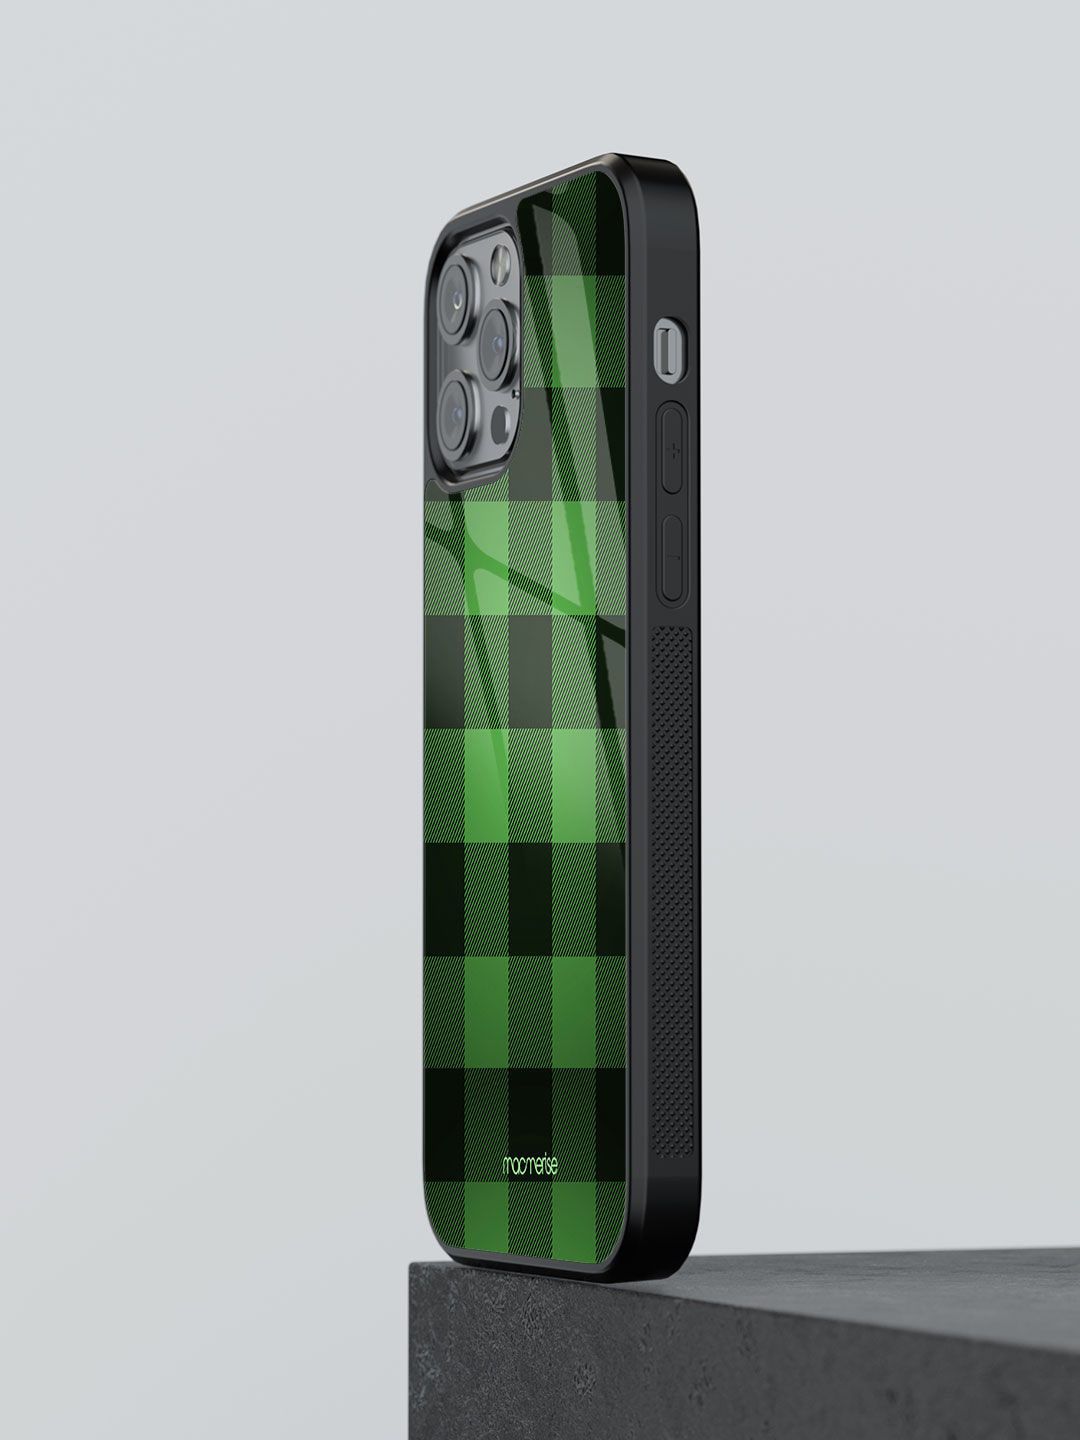 macmerise Black & Green Printed iPhone 12 Pro Back Cover Price in India